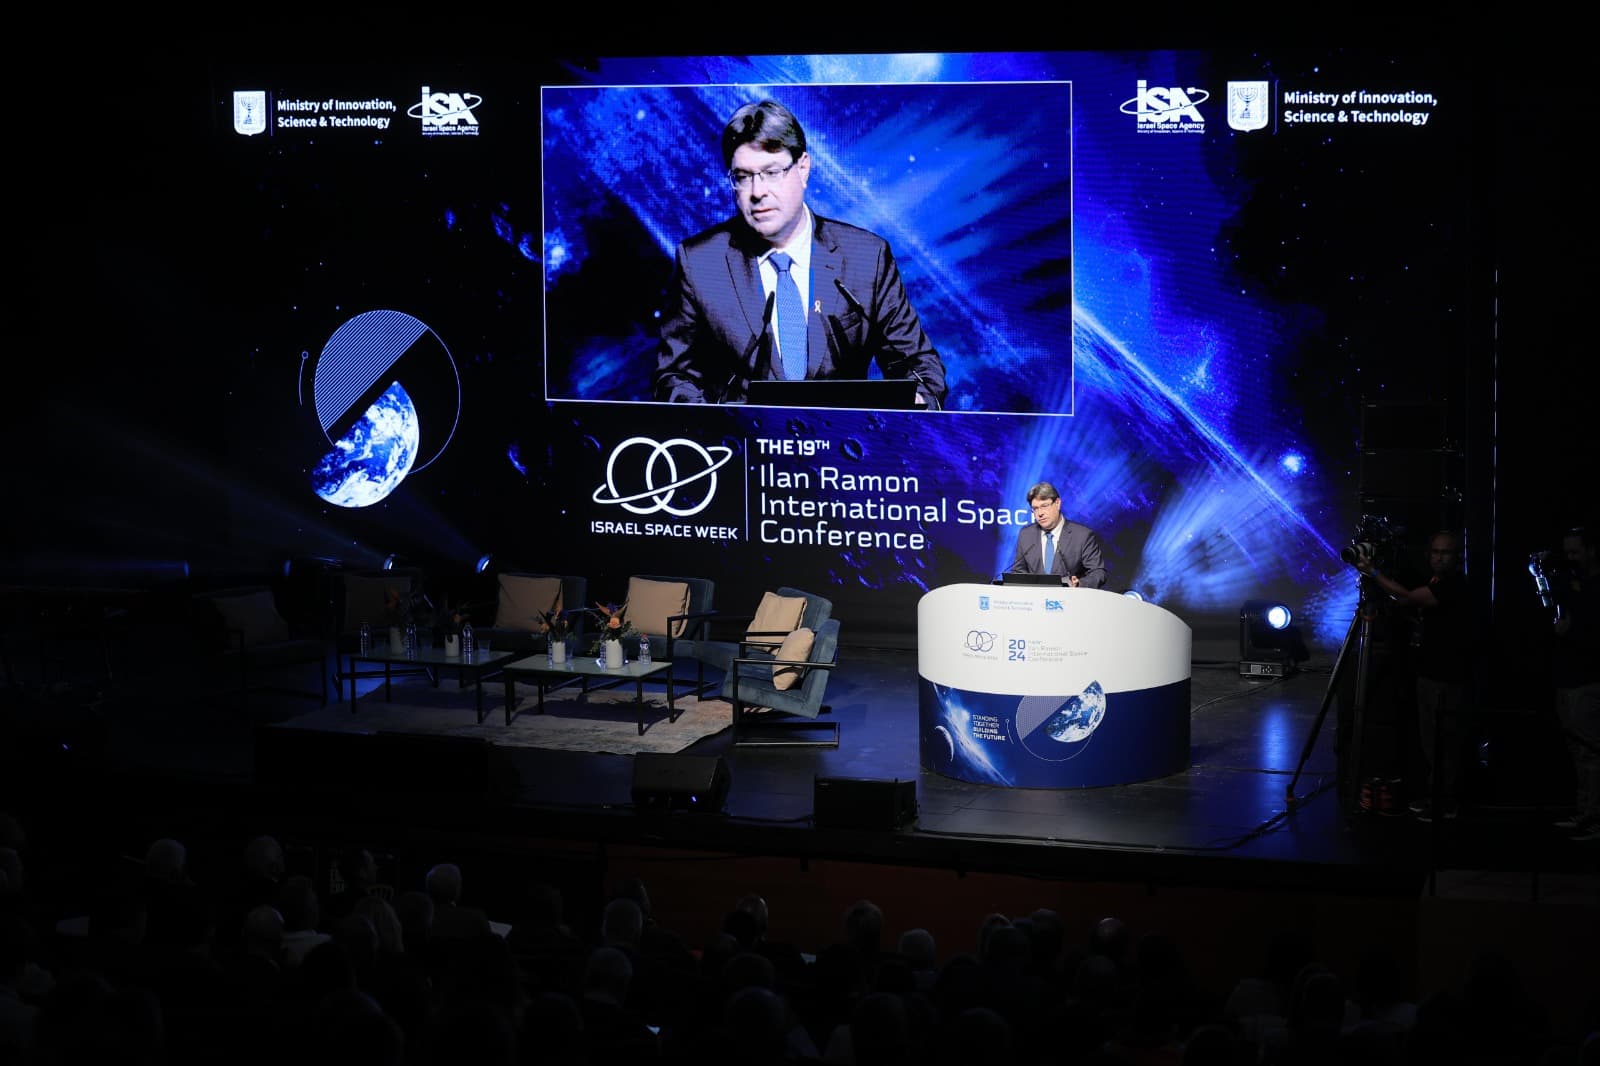 The conference was attended by senior NASA officials and other guests from the global space industry. Ofir Akunis, Minister of Innovation, Science and Technology. Credit: Oz Shechter, Government Press Office.